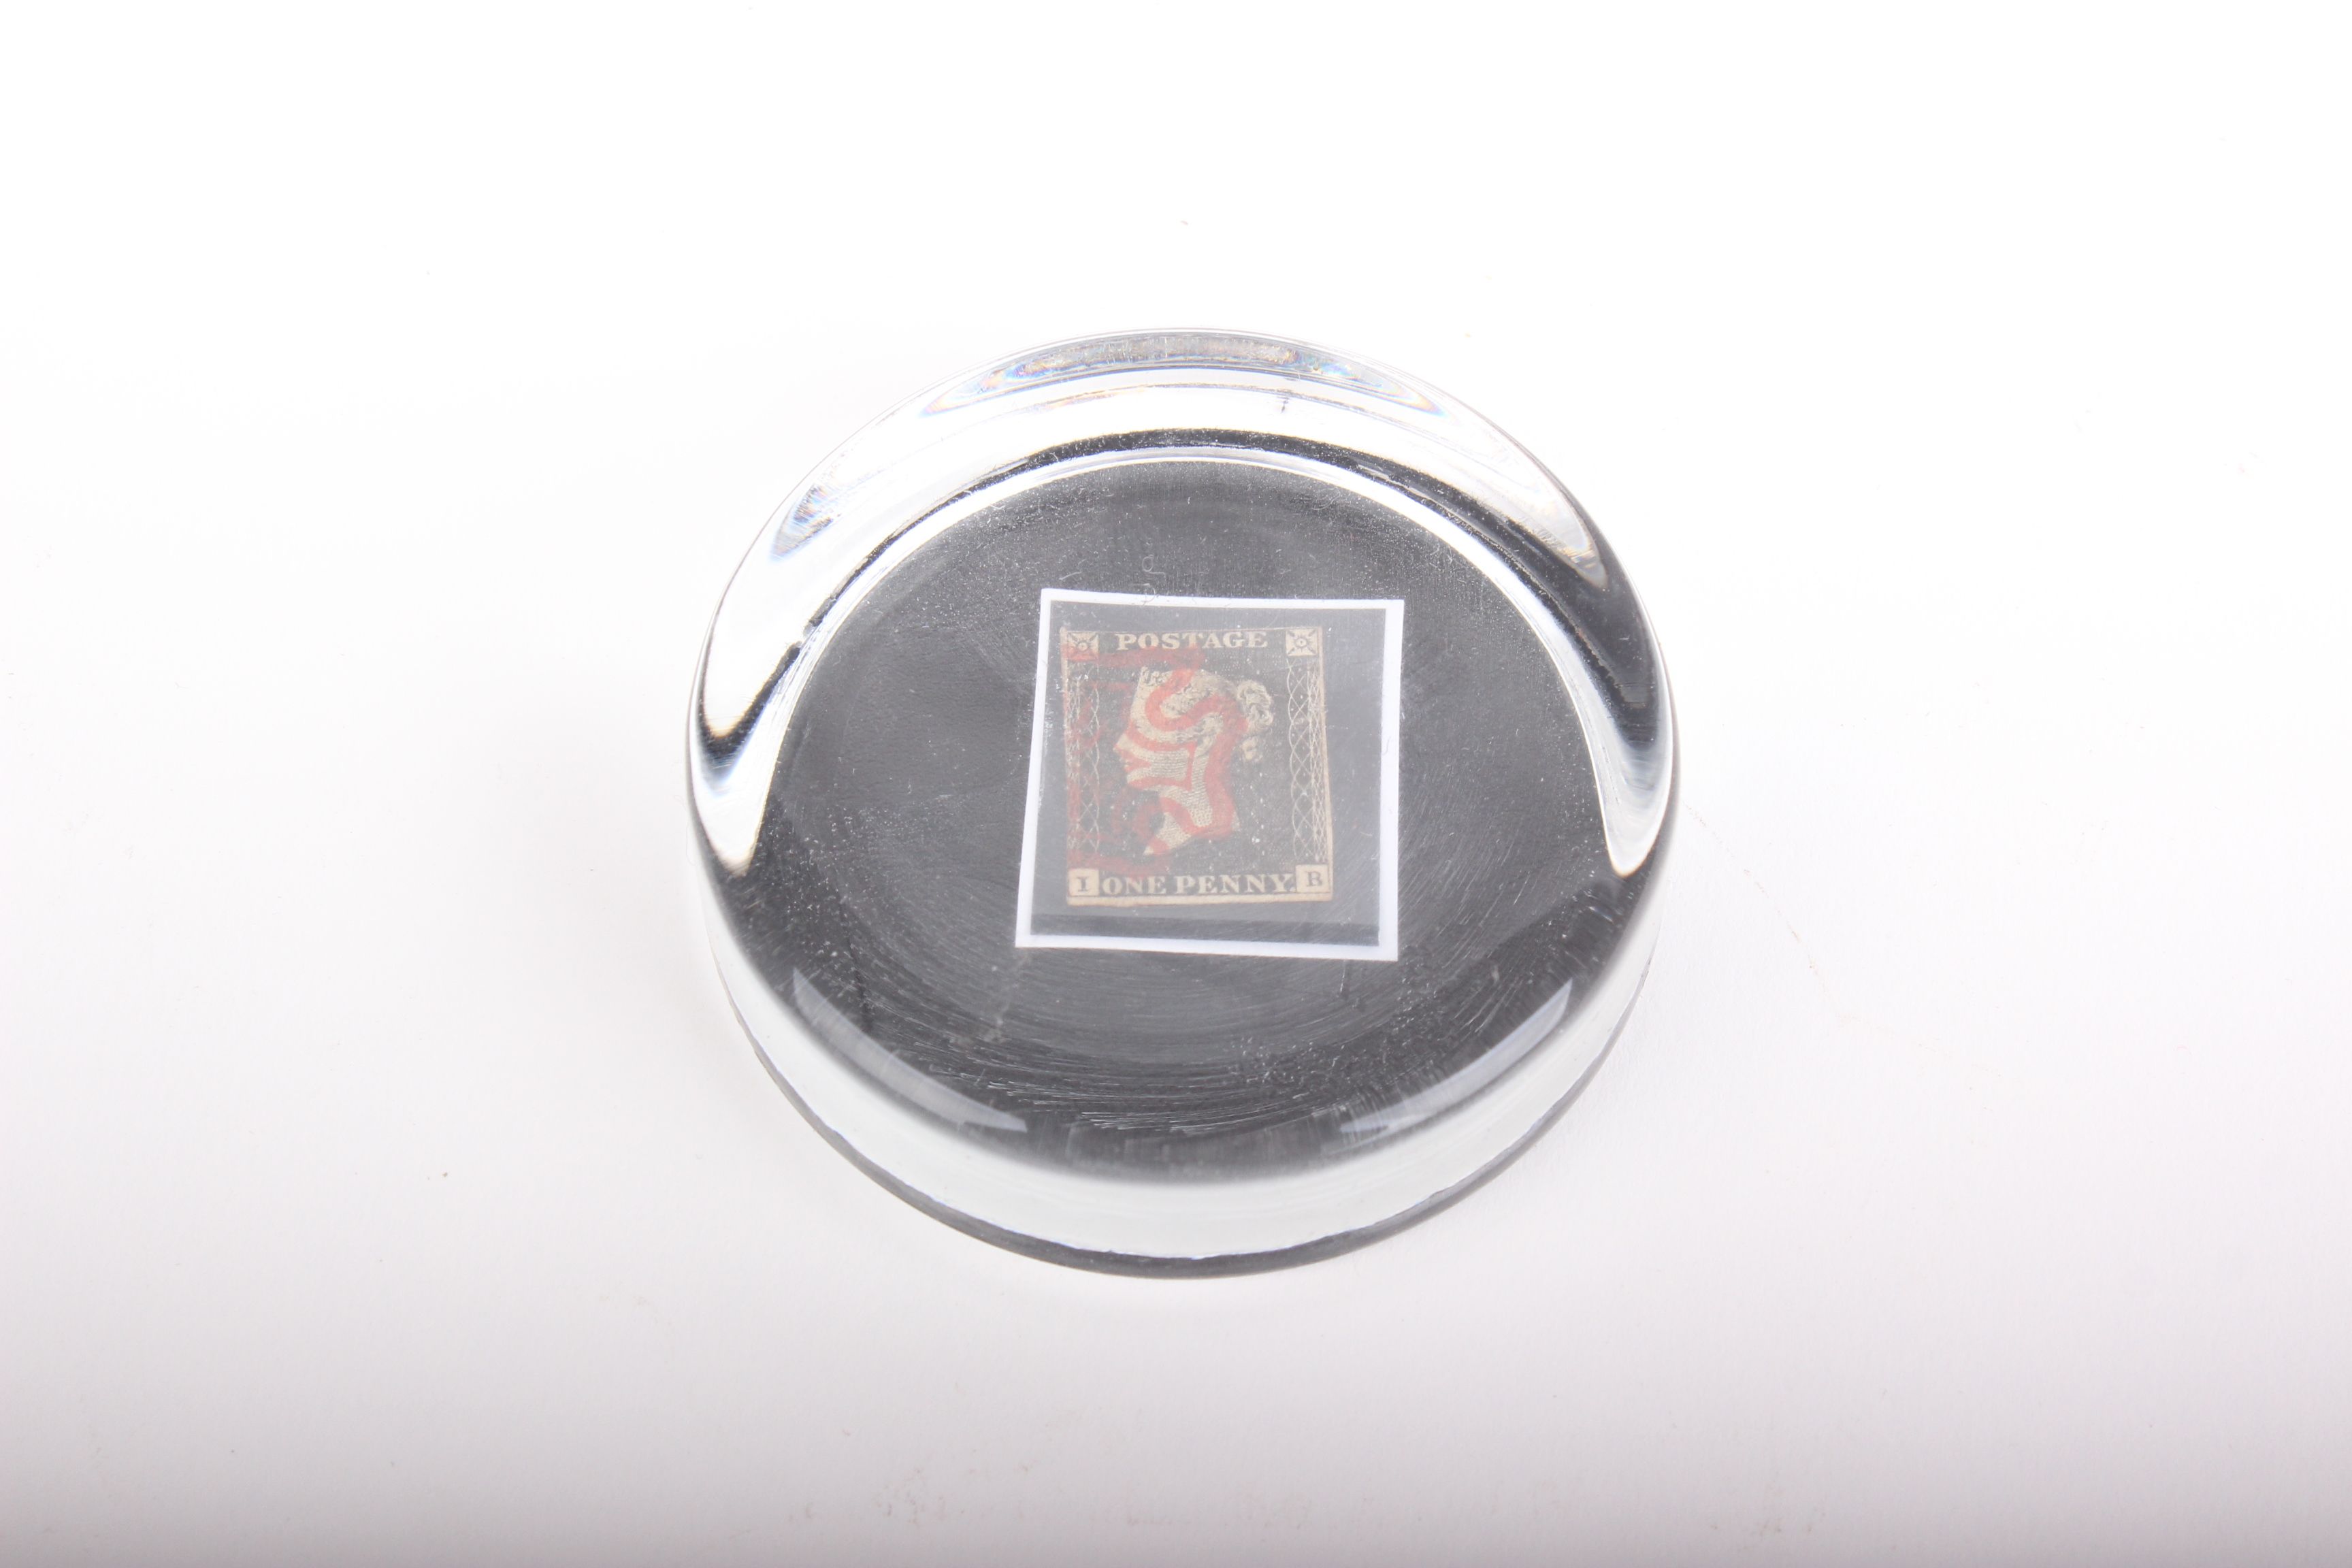 Original Penny Black mounted in paperweight - Image 2 of 2